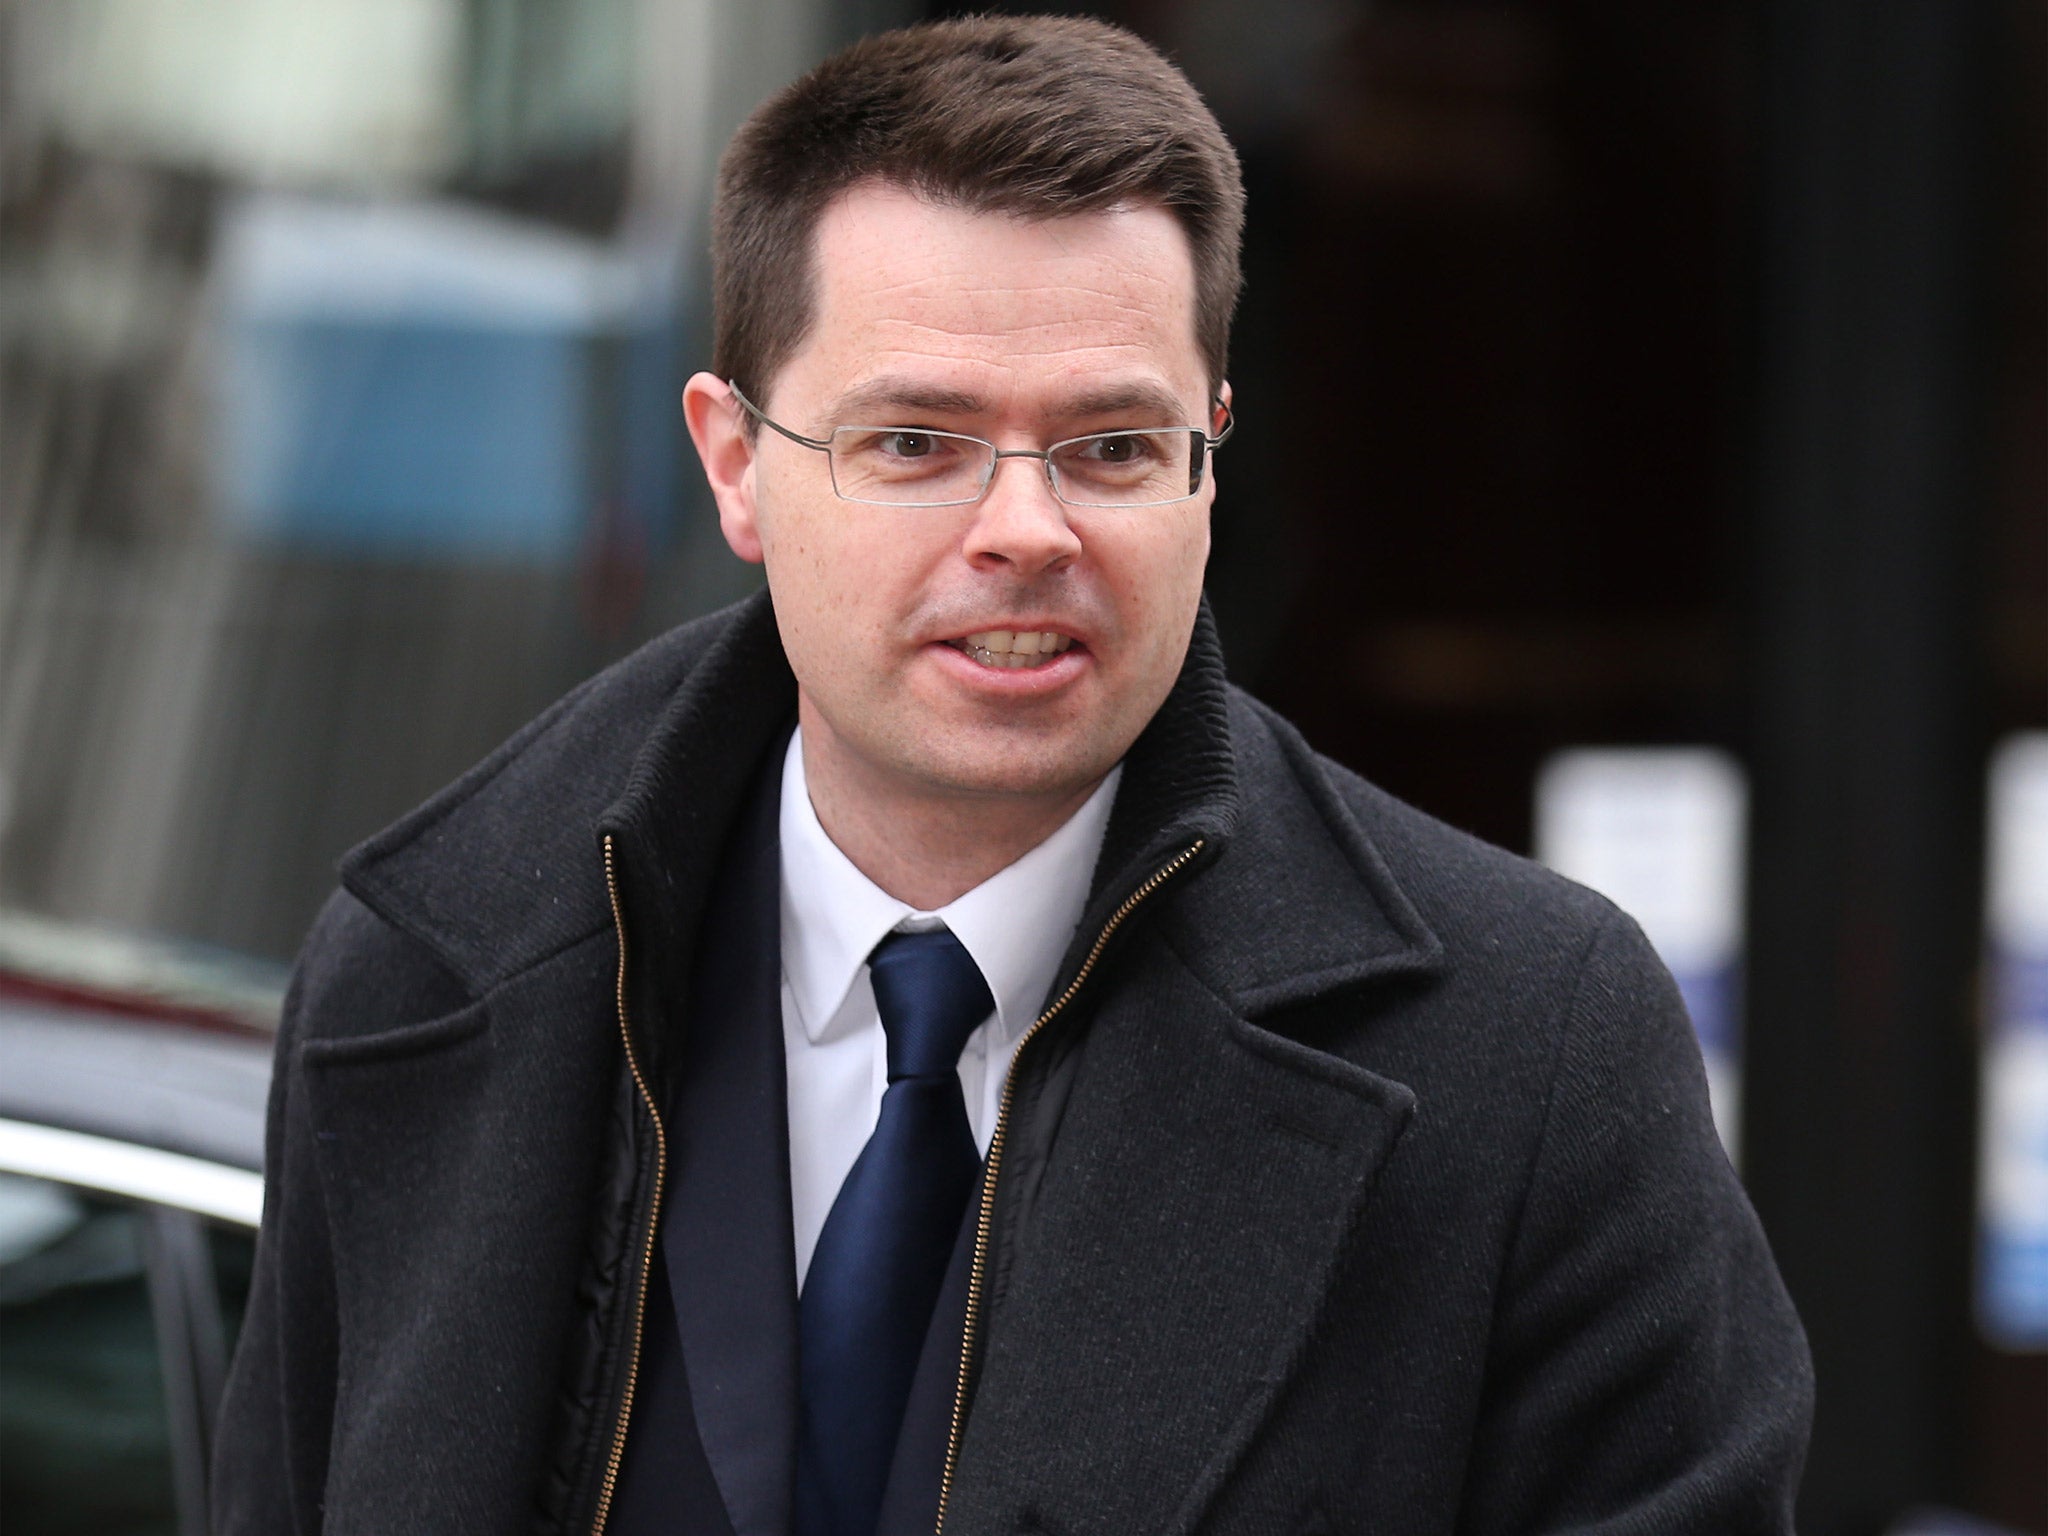 Immigration Minister James Brokenshire has been conspicuous by his absence from interviews during the refugee crisis, Chris Hemmings argued